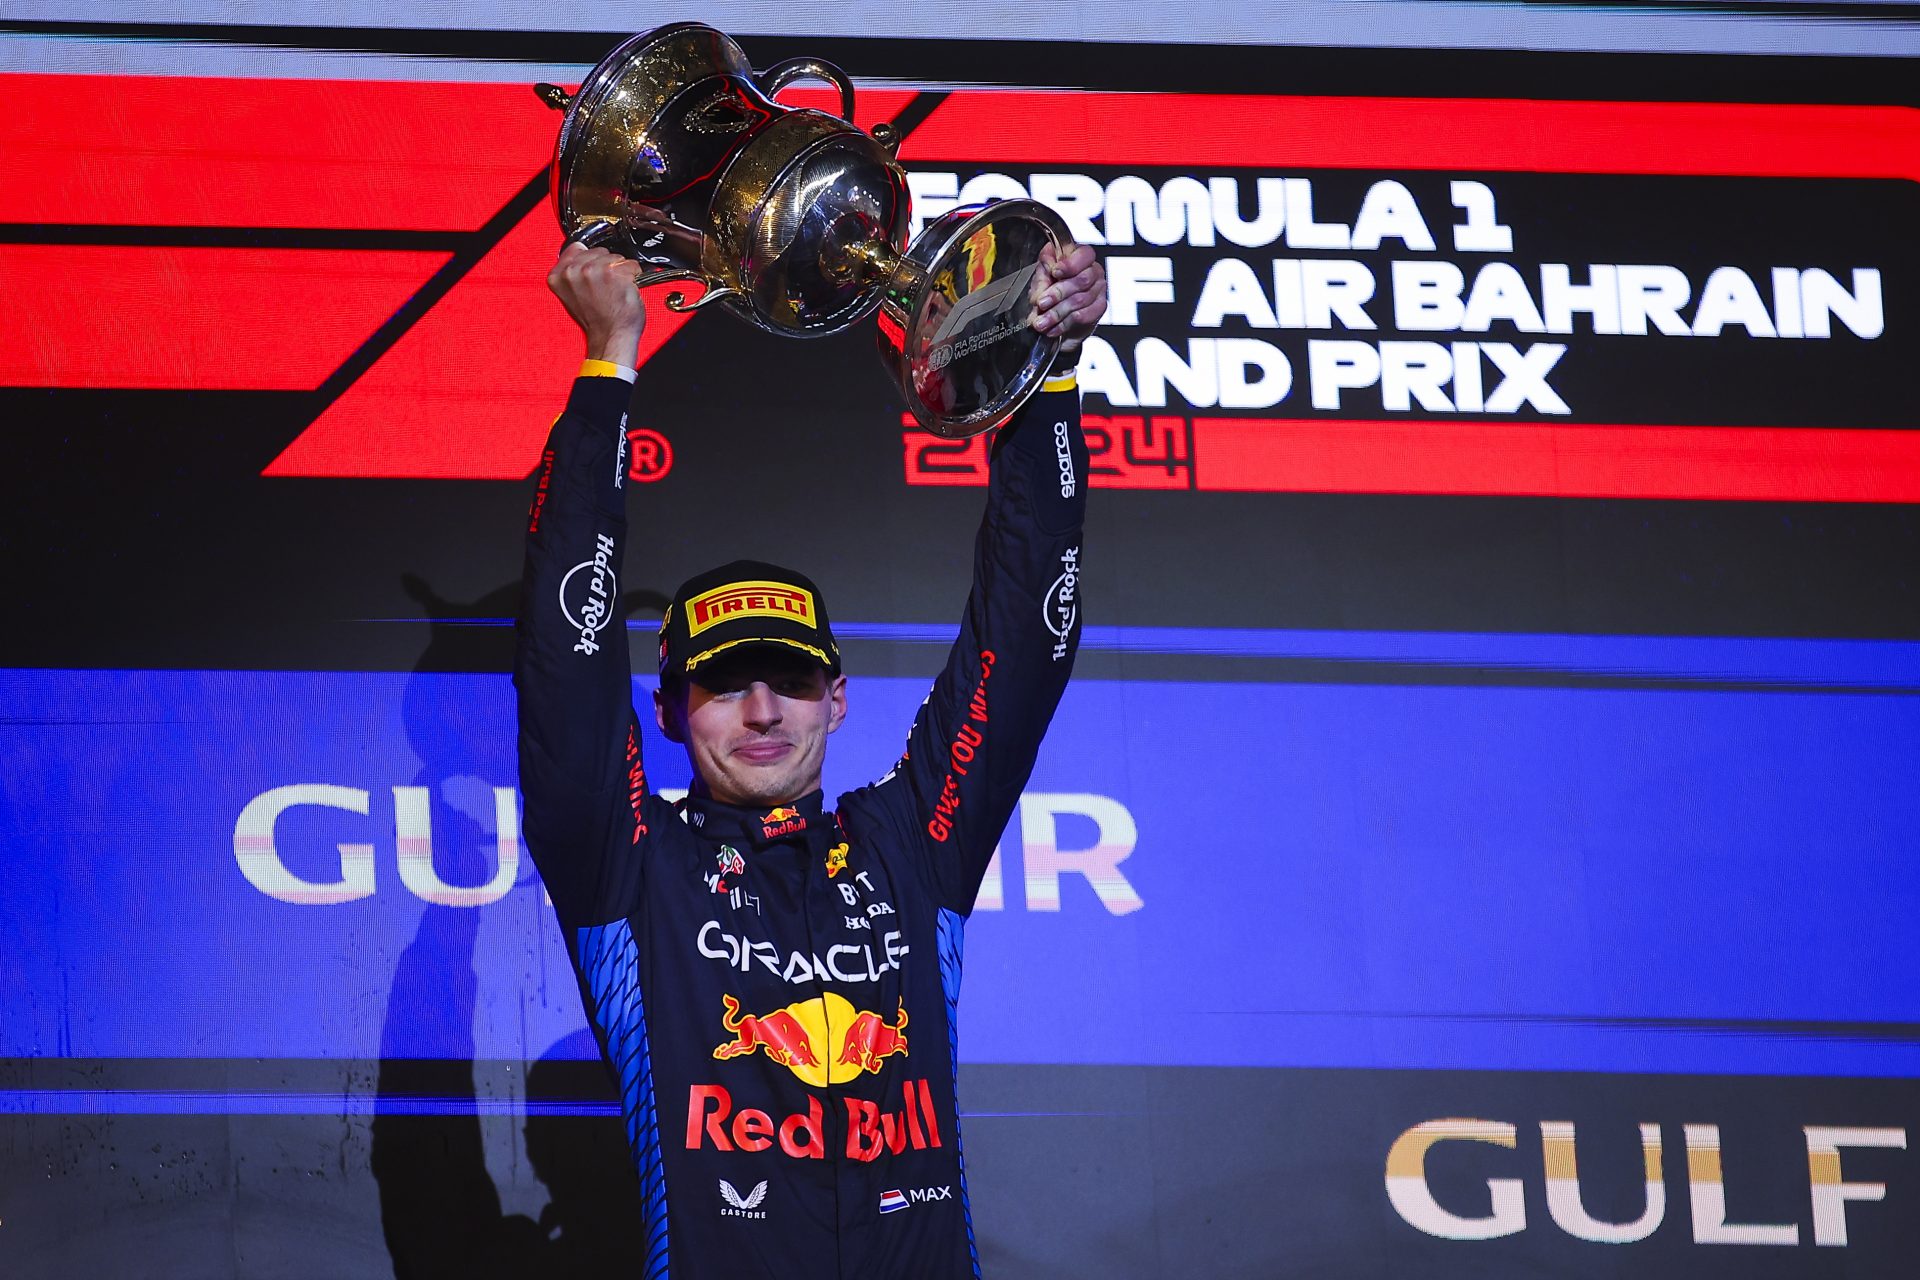 Are there any legitimate challengers to Max Verstappen and Red Bull?